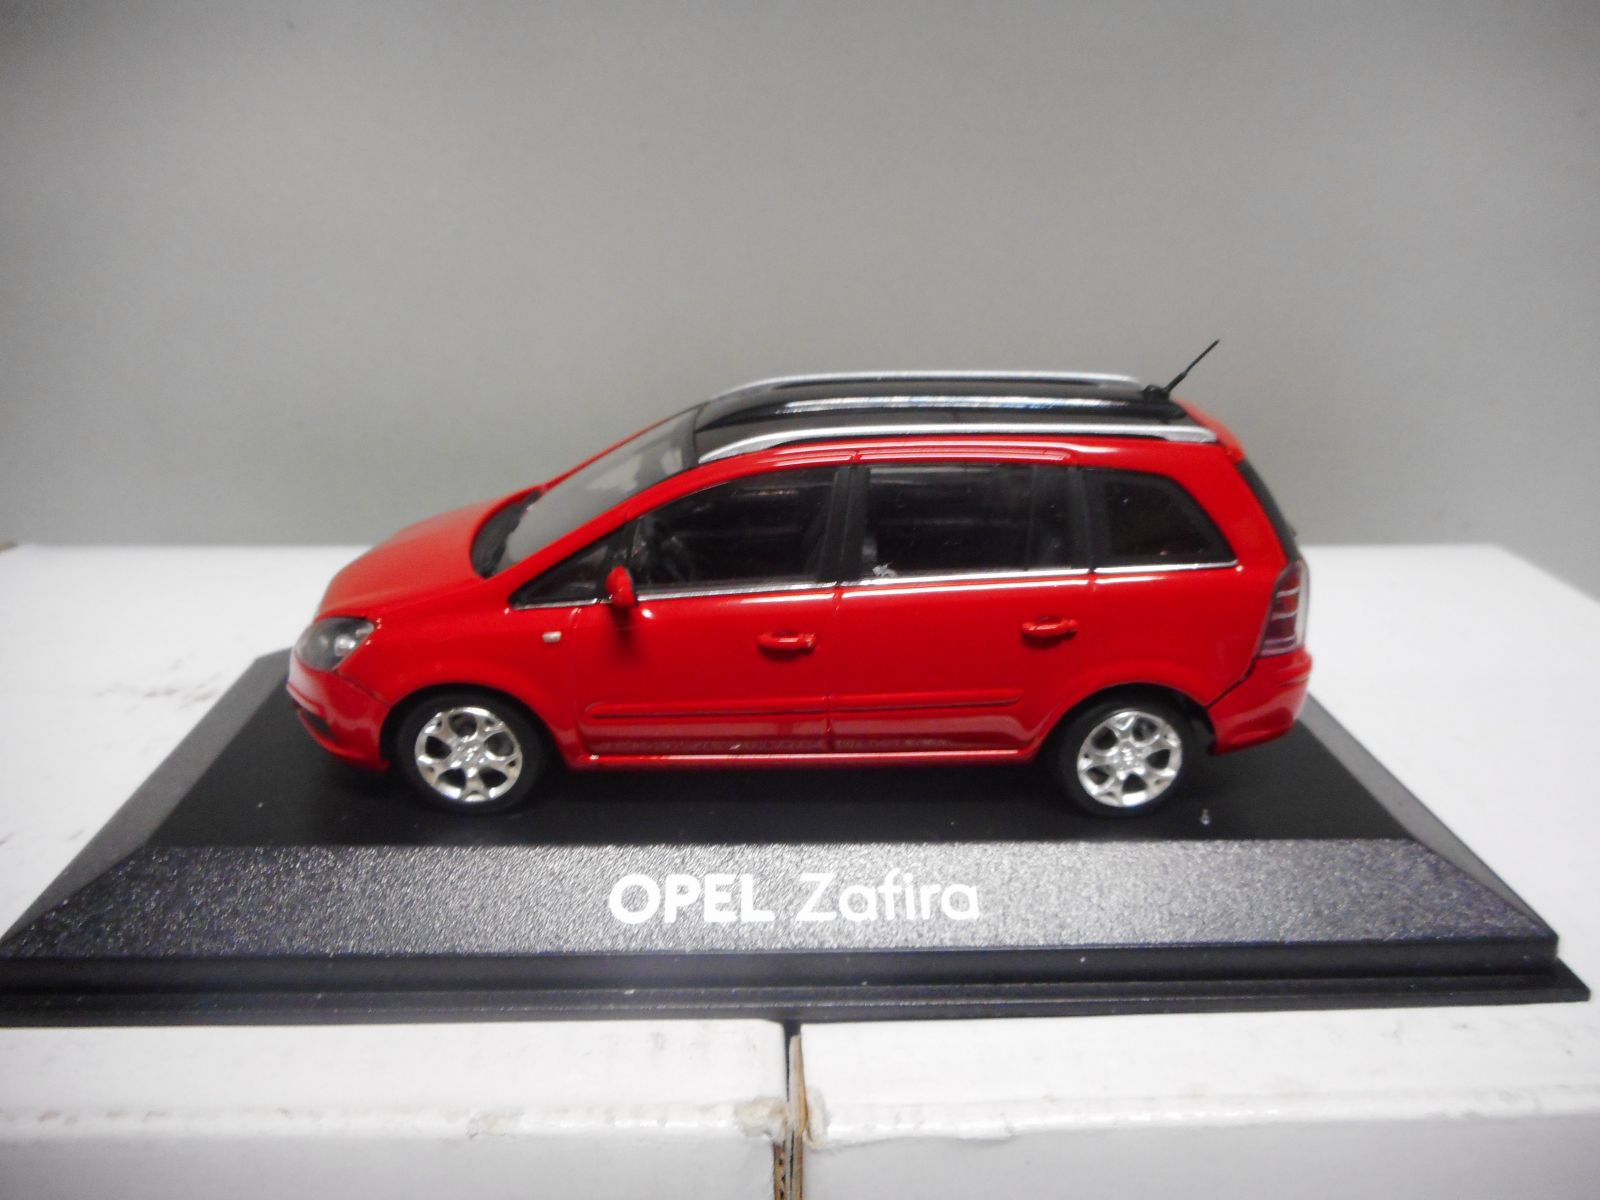 Opel Zafira B Panorama Roof by dtmsnoopy on DeviantArt